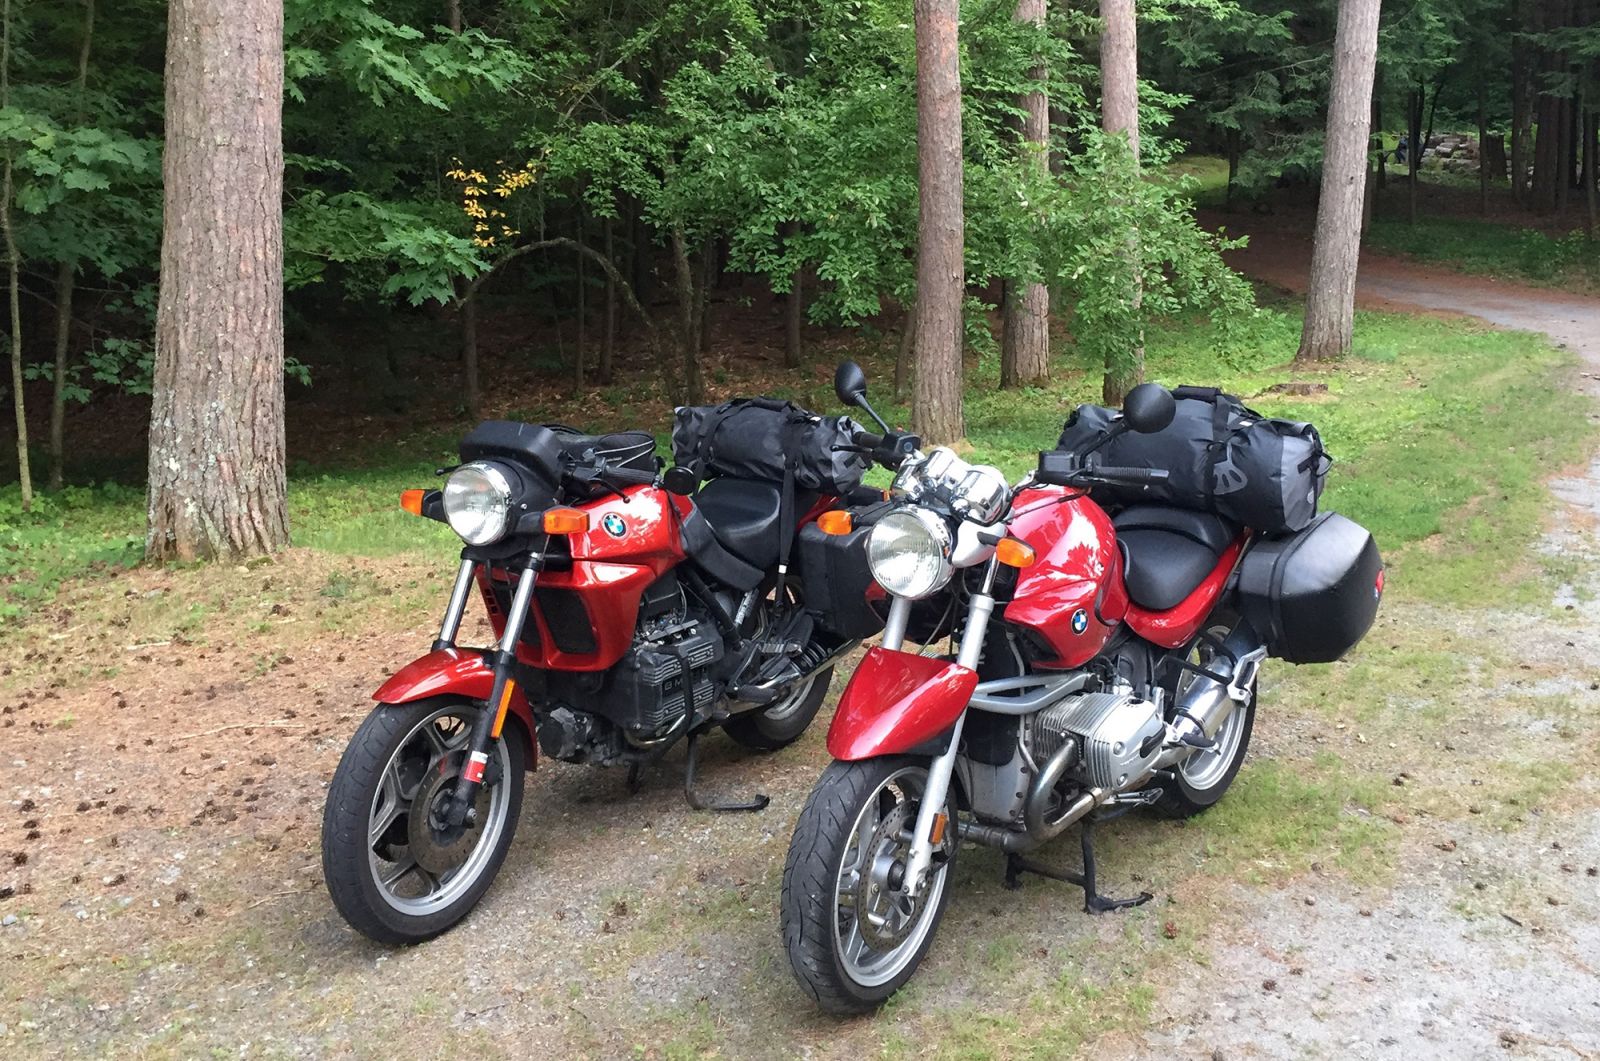 Motorcycles packed and ready to roll.